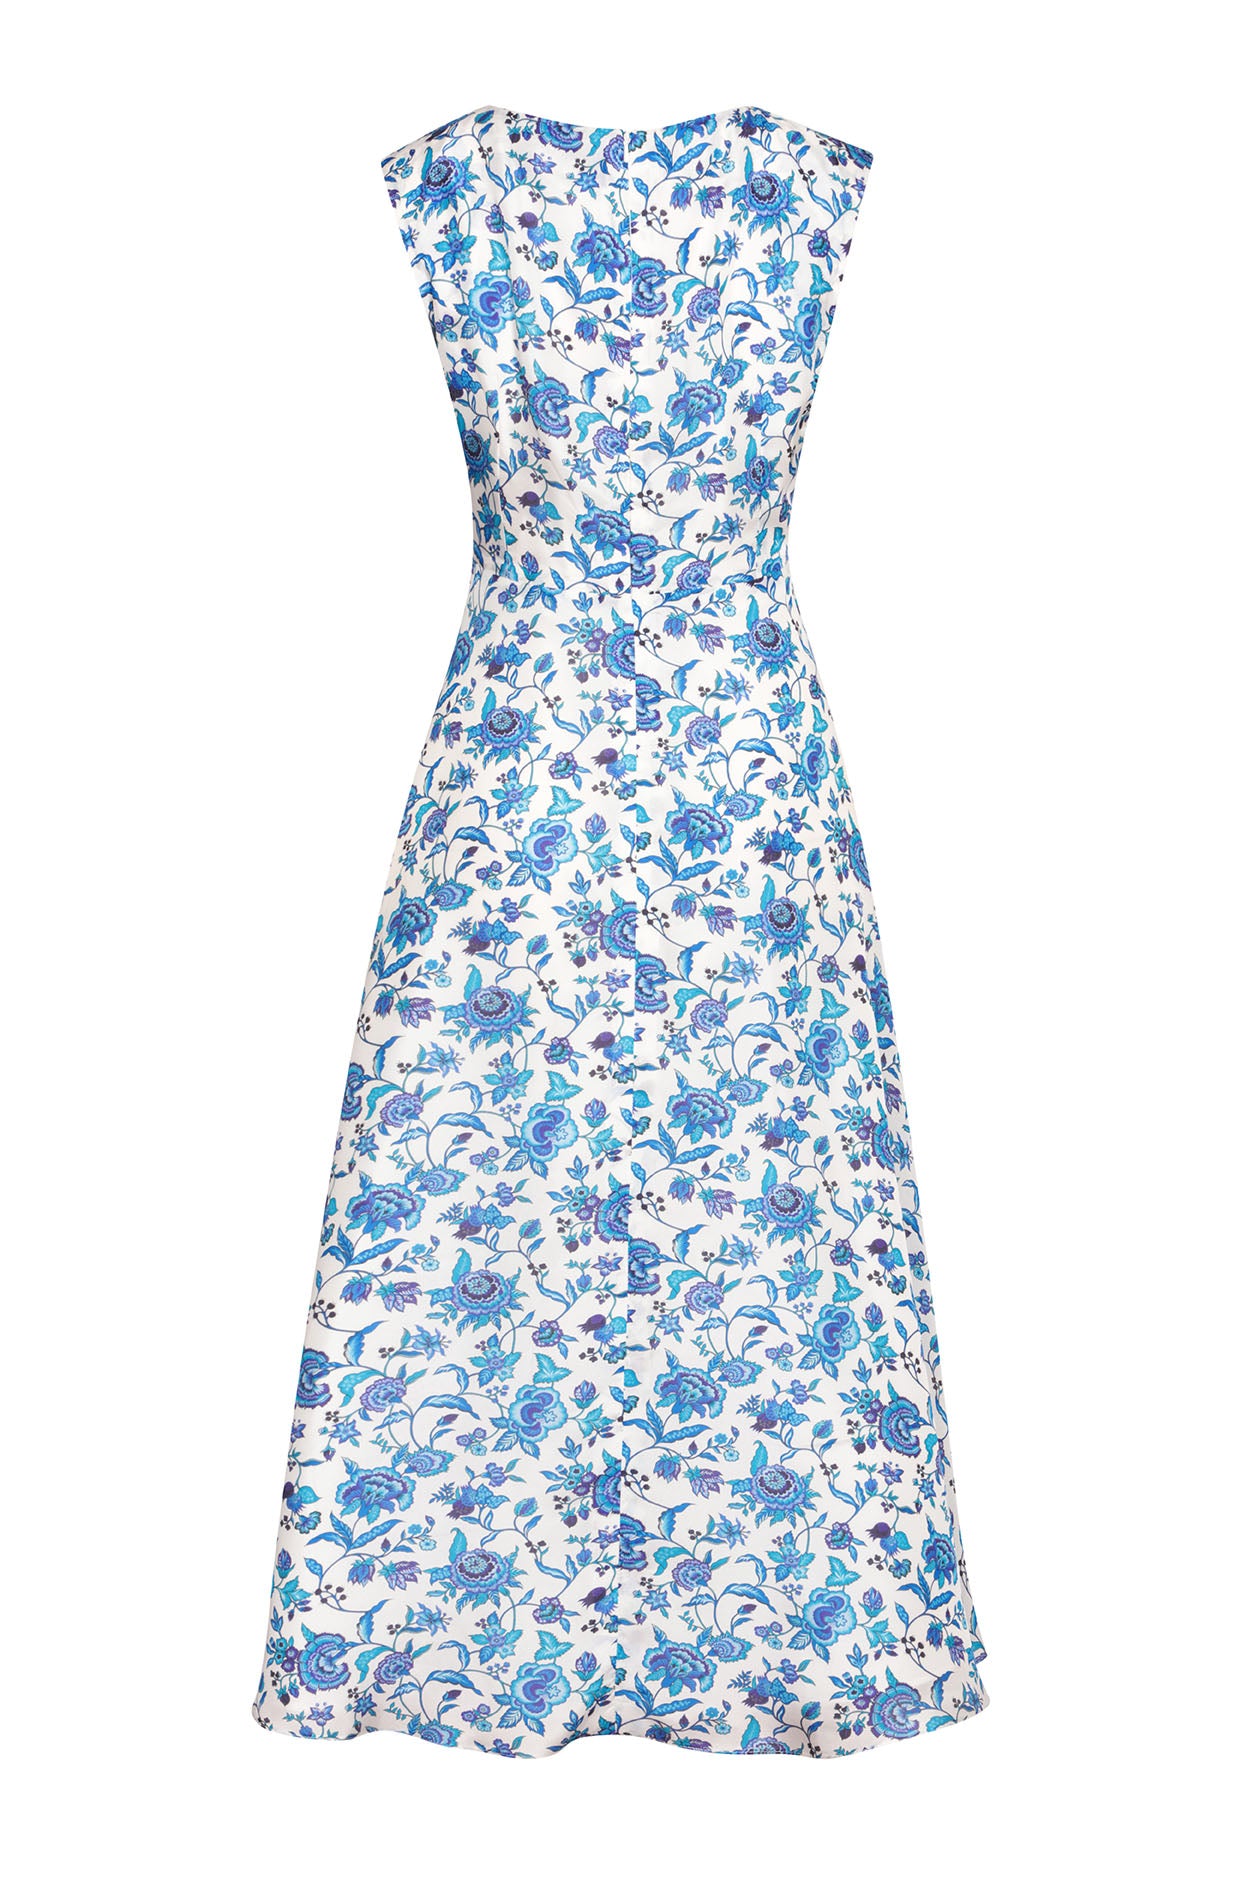 Sleeveless Midi Length Silk Dress in Ivory with Blue/Turquoise Florentine Floral Print - Lettie